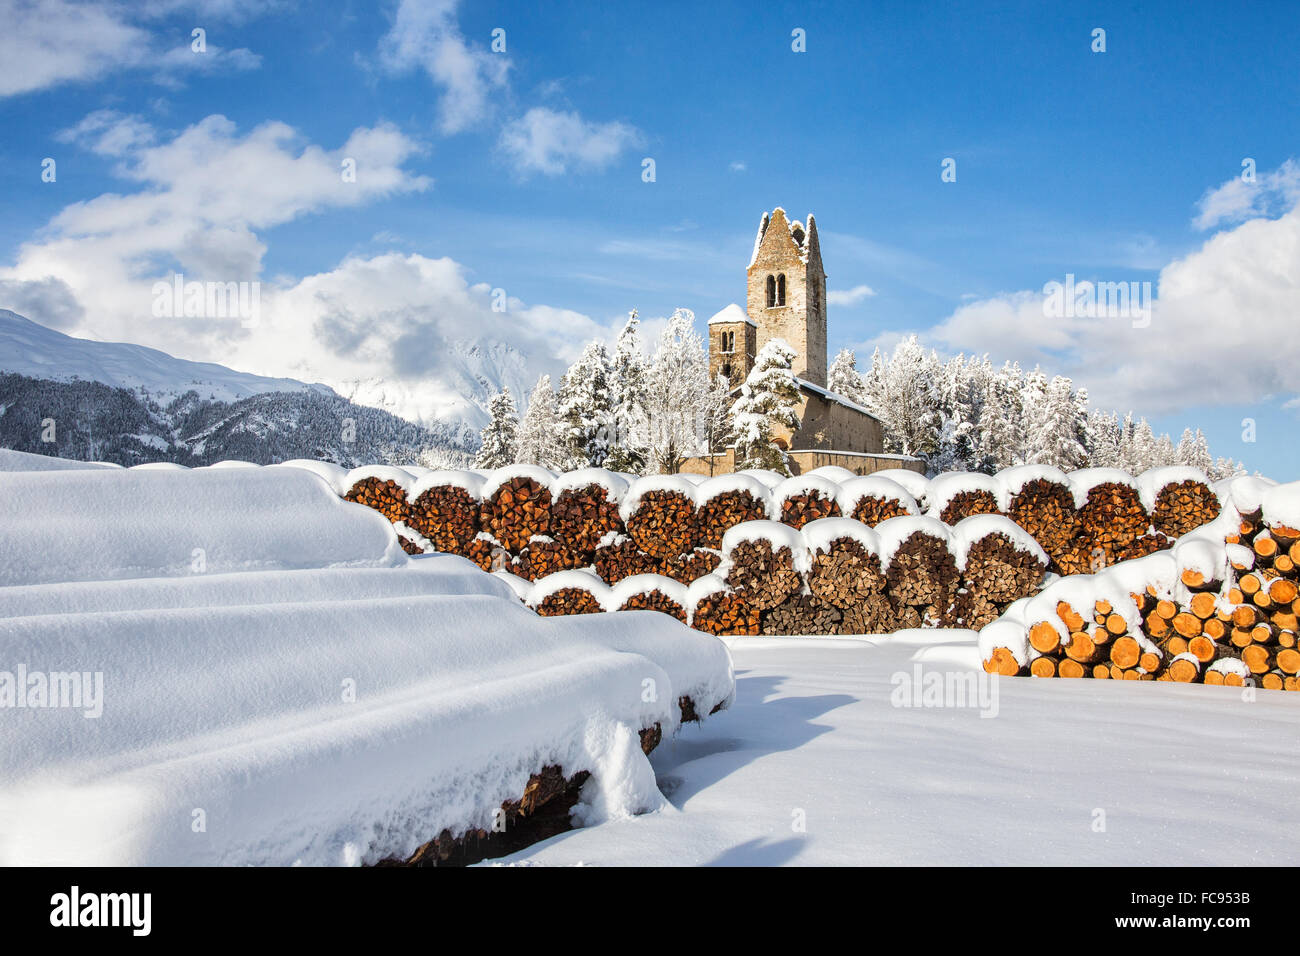 The church of San Gian surrounded by snowy woods, Celerina, Engadine, Canton of Grisons (Graubunden), Switzerland, Europe Stock Photo